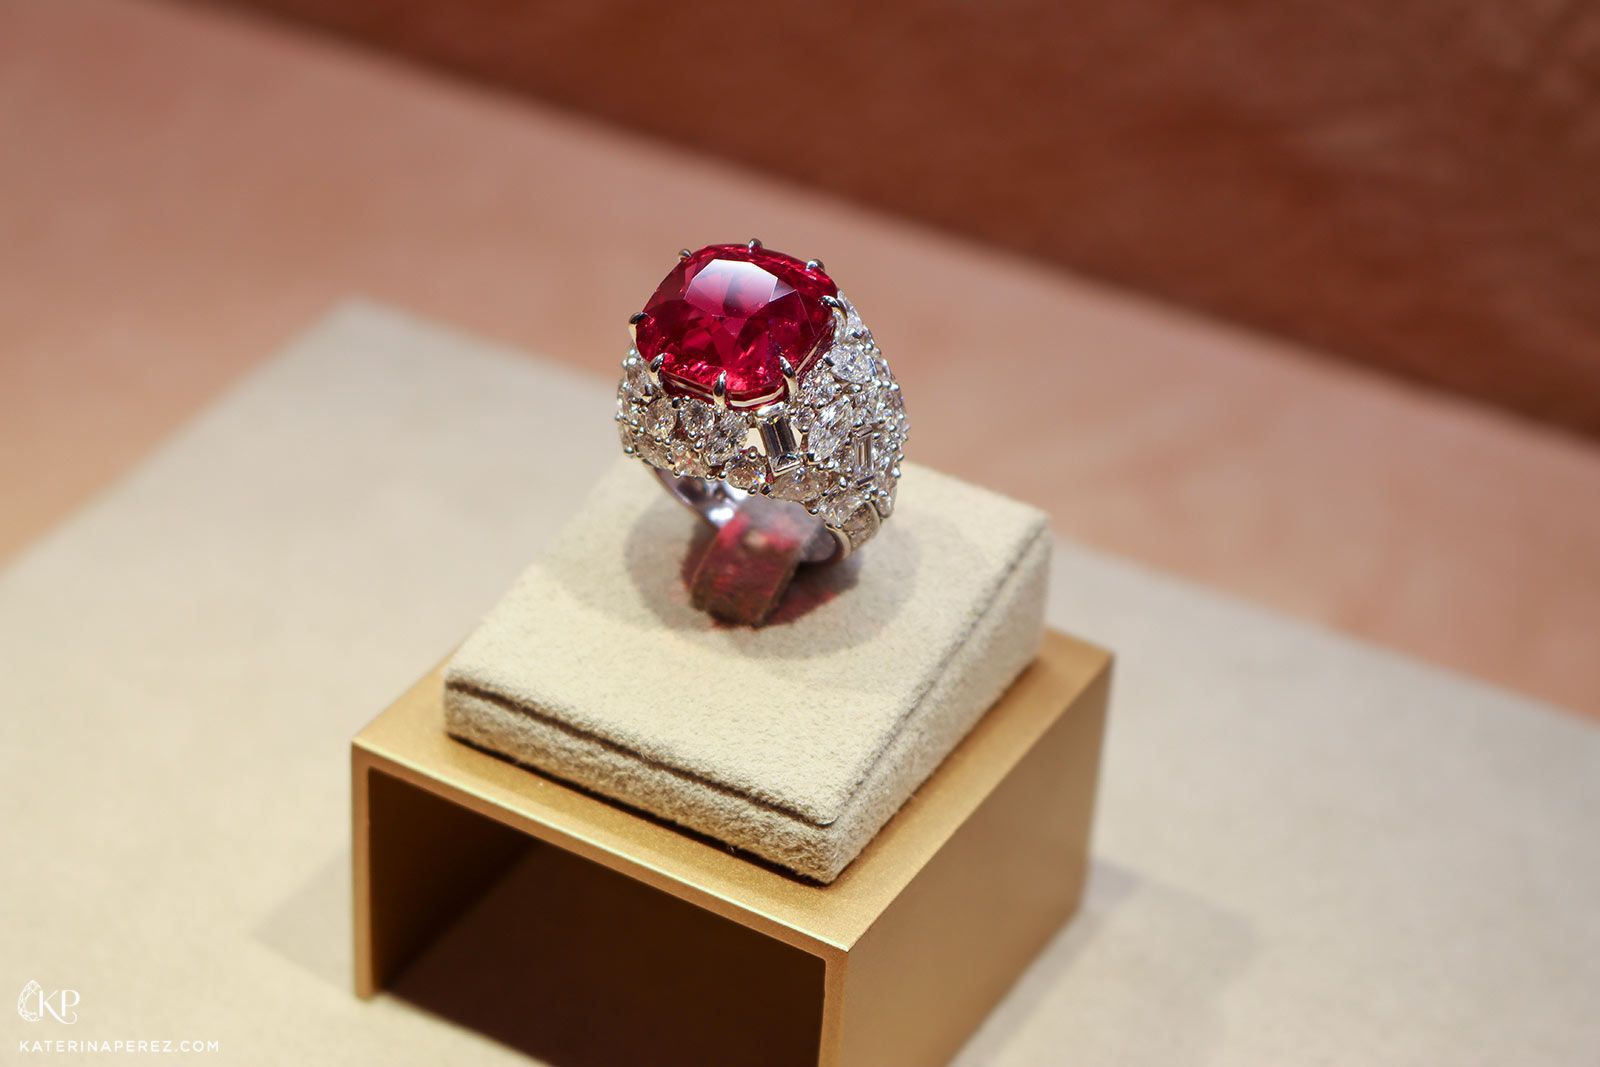 Maison Avani ring with a 21.02 carat red spinel and diamonds